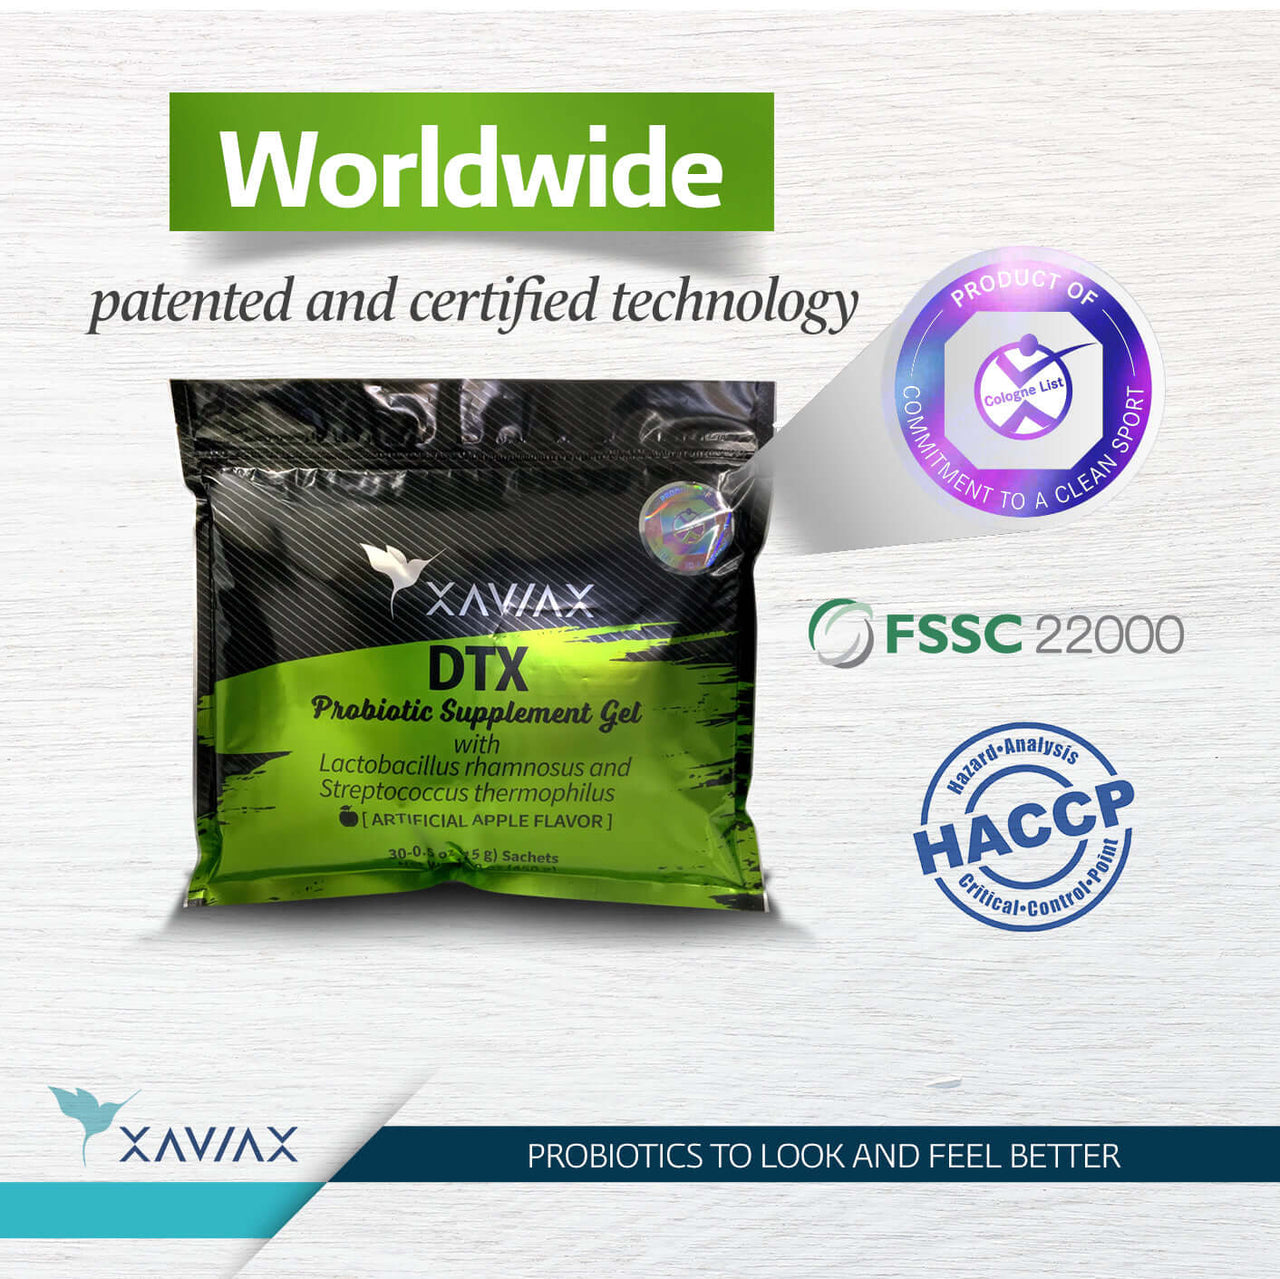 worldwide patented and certifies technology dtx probiotics